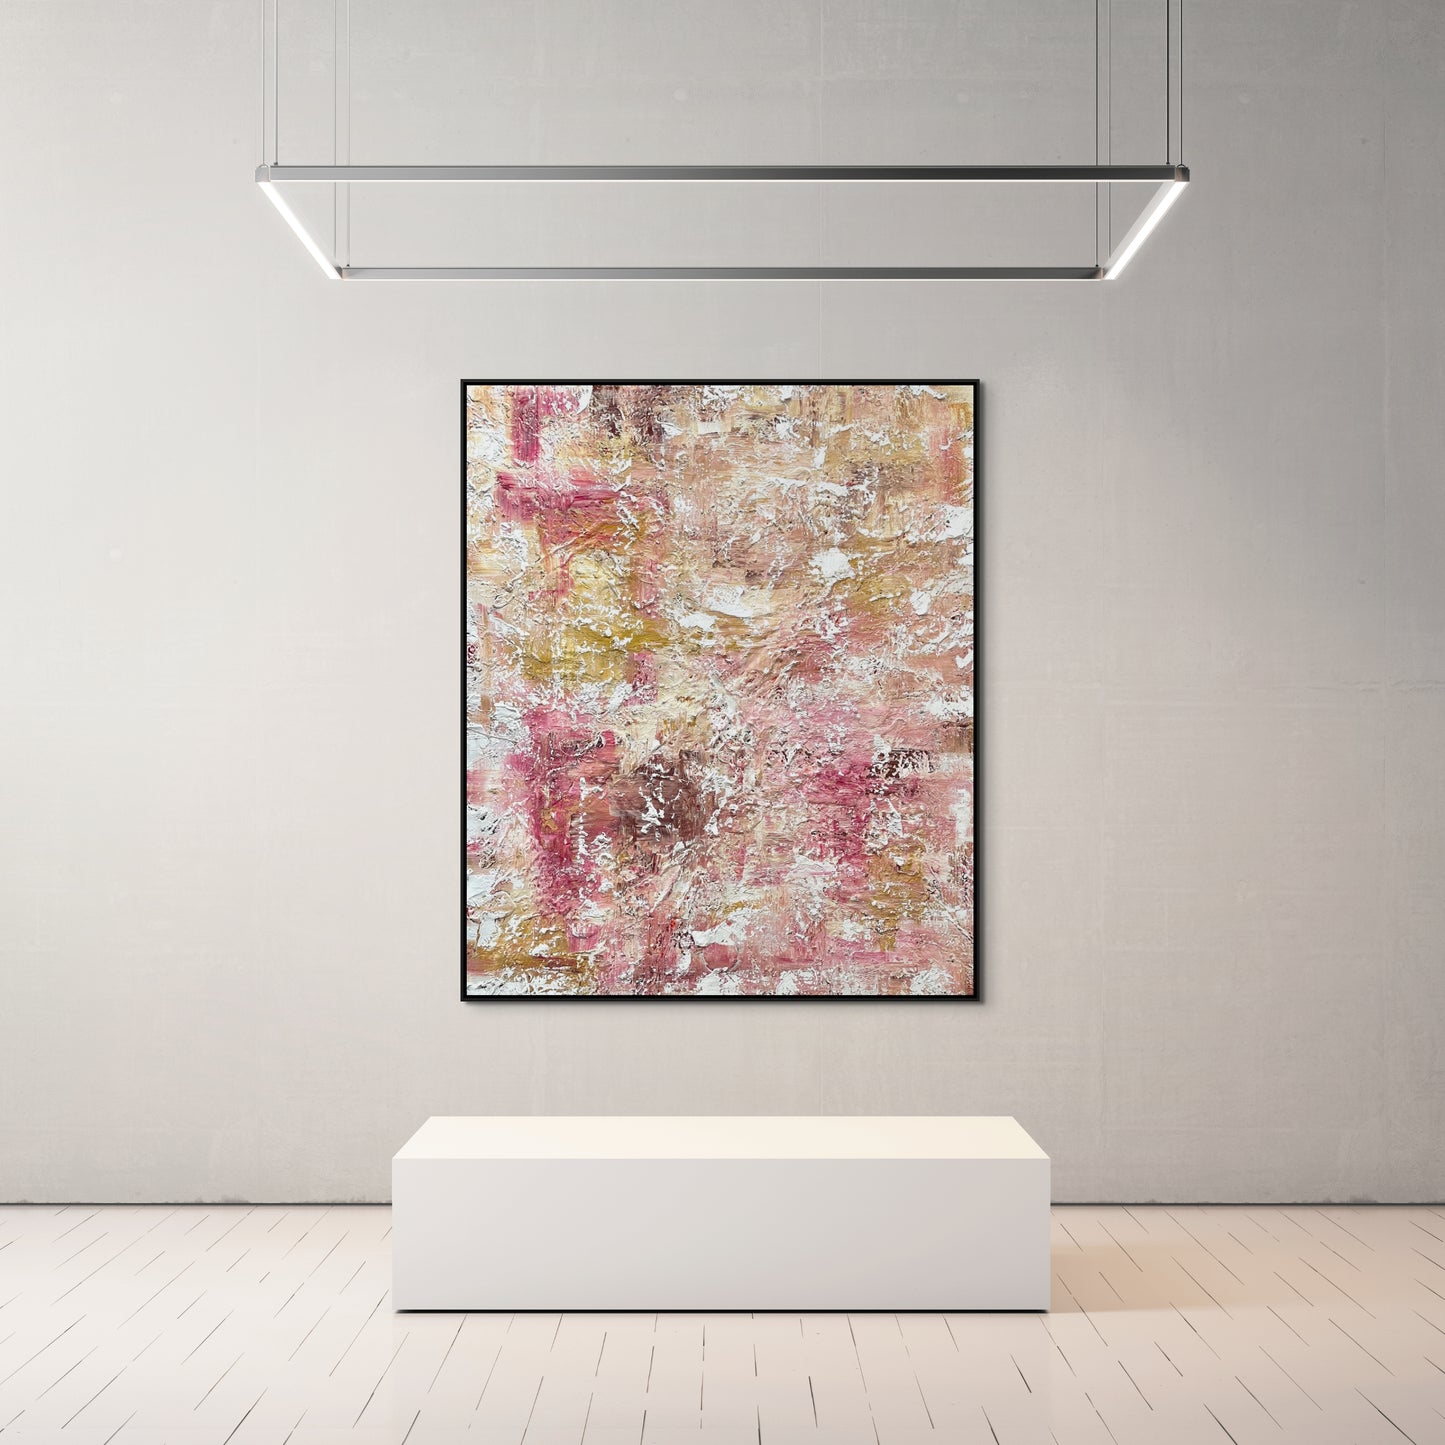 SOLD - Looking Through Full Sunset 150x180cm